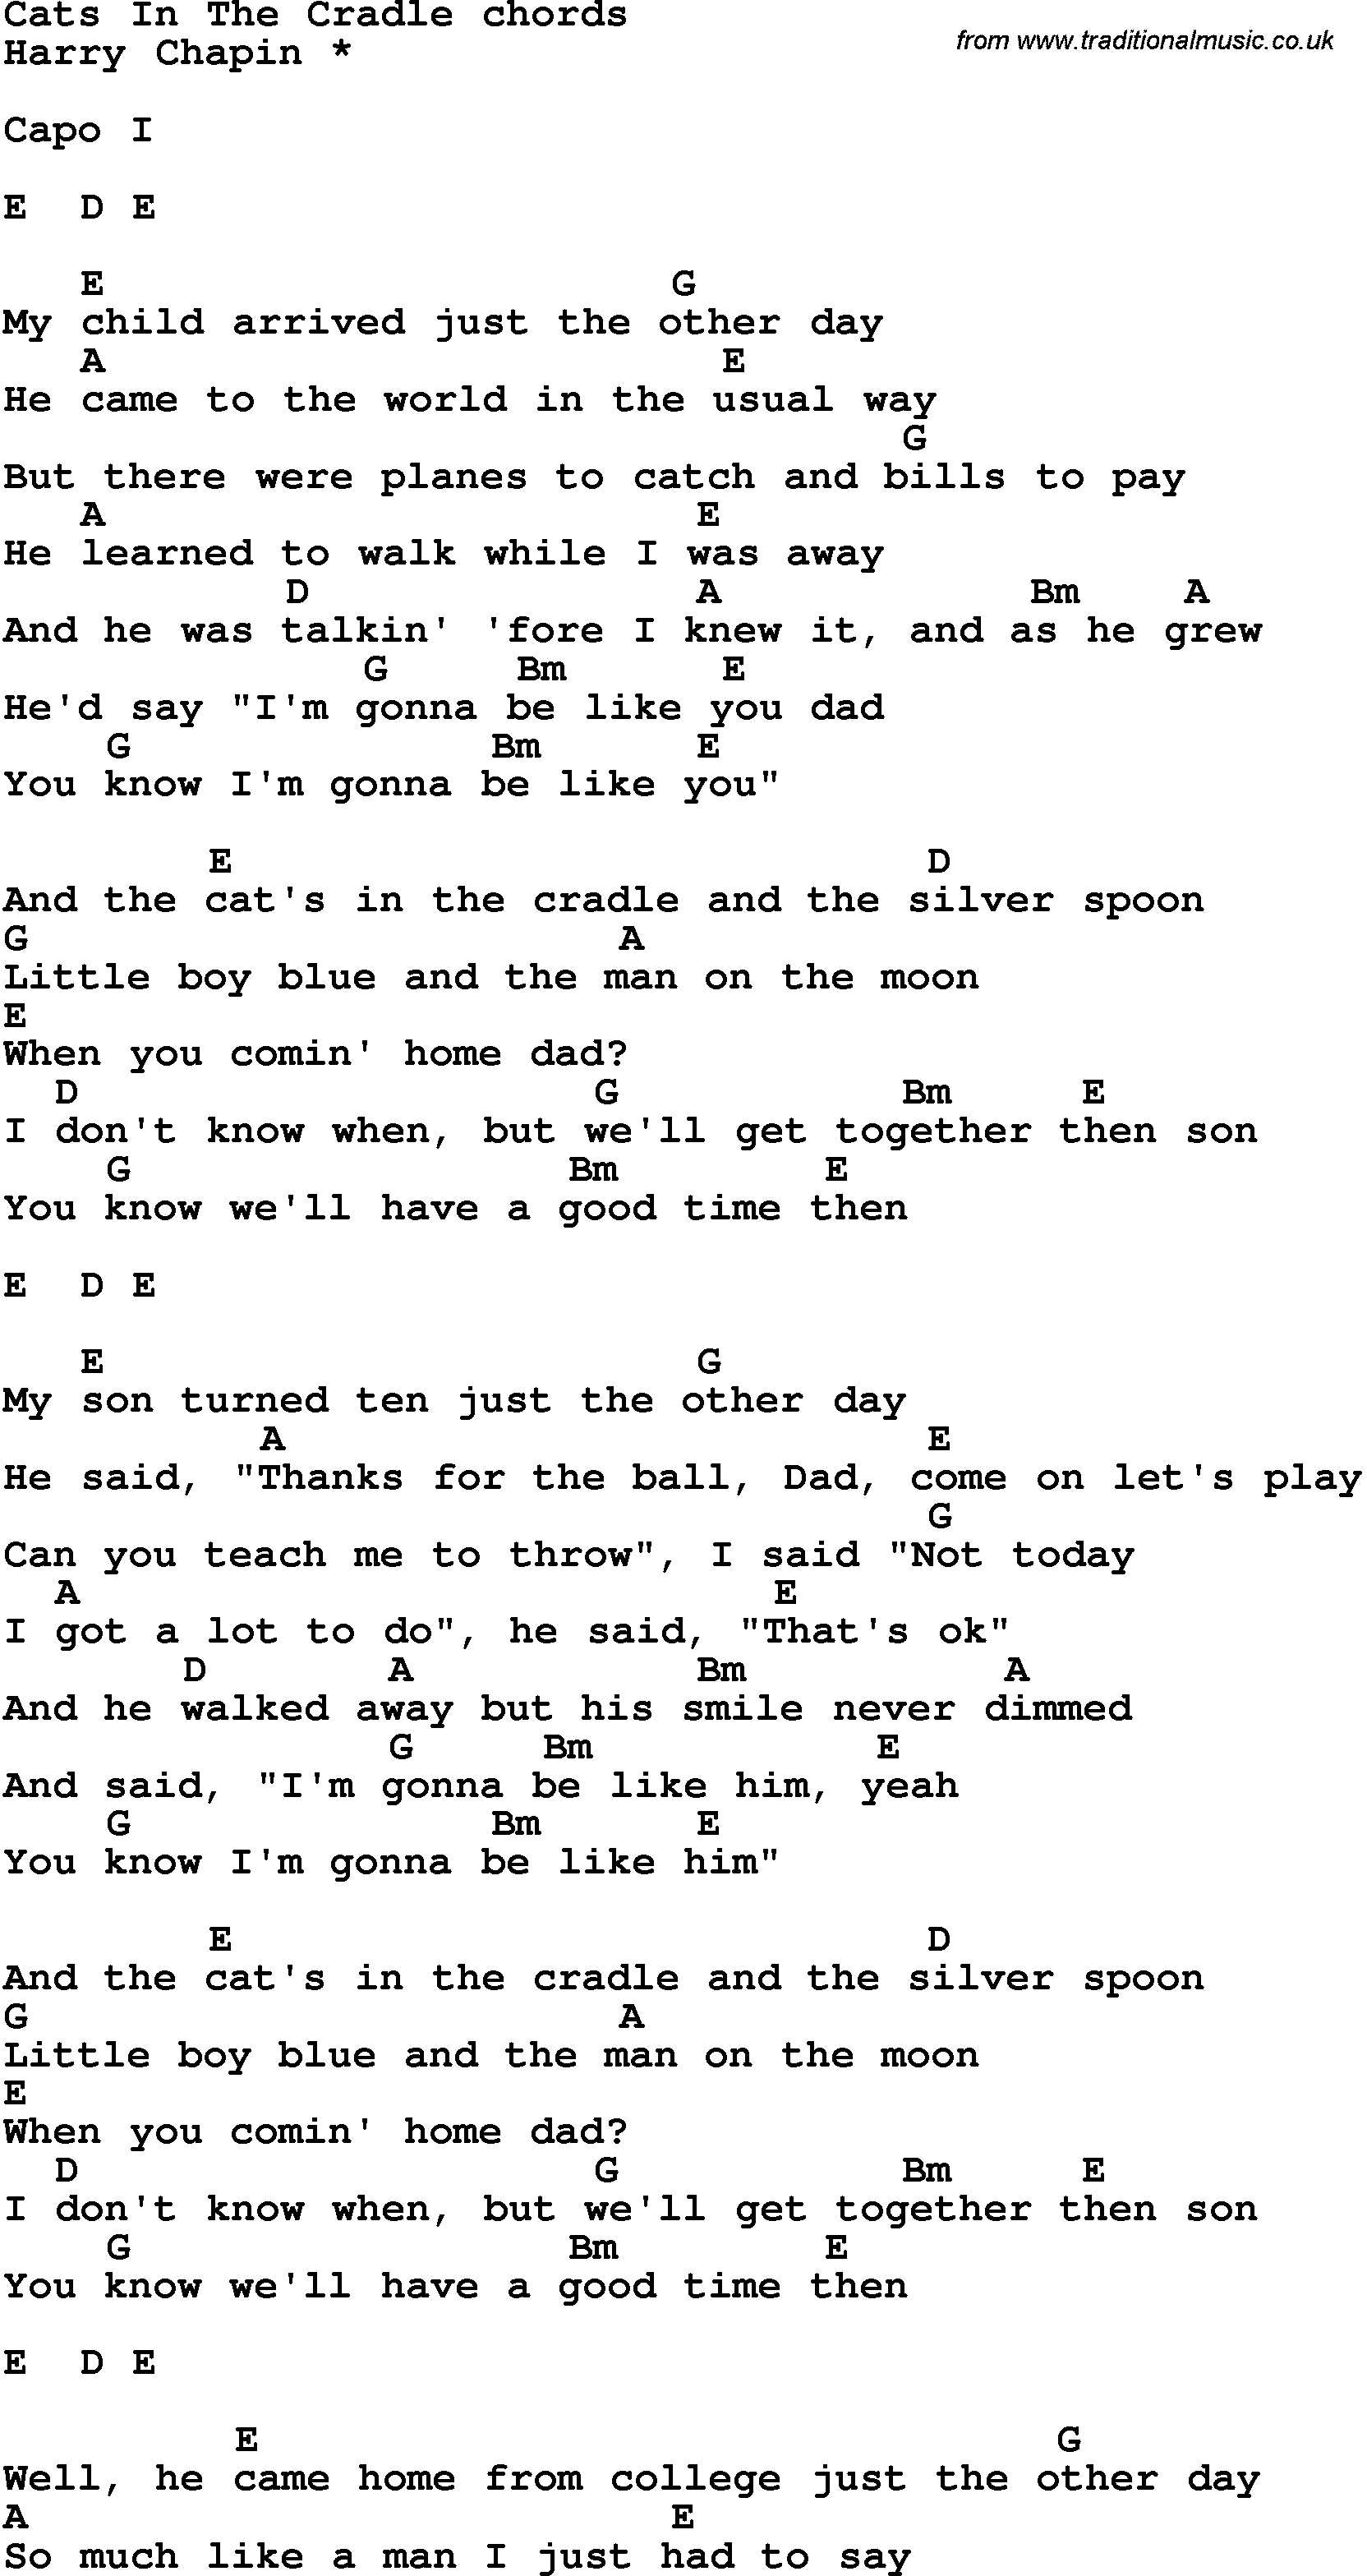 Song Lyrics with guitar chords for Cats In The Cradle